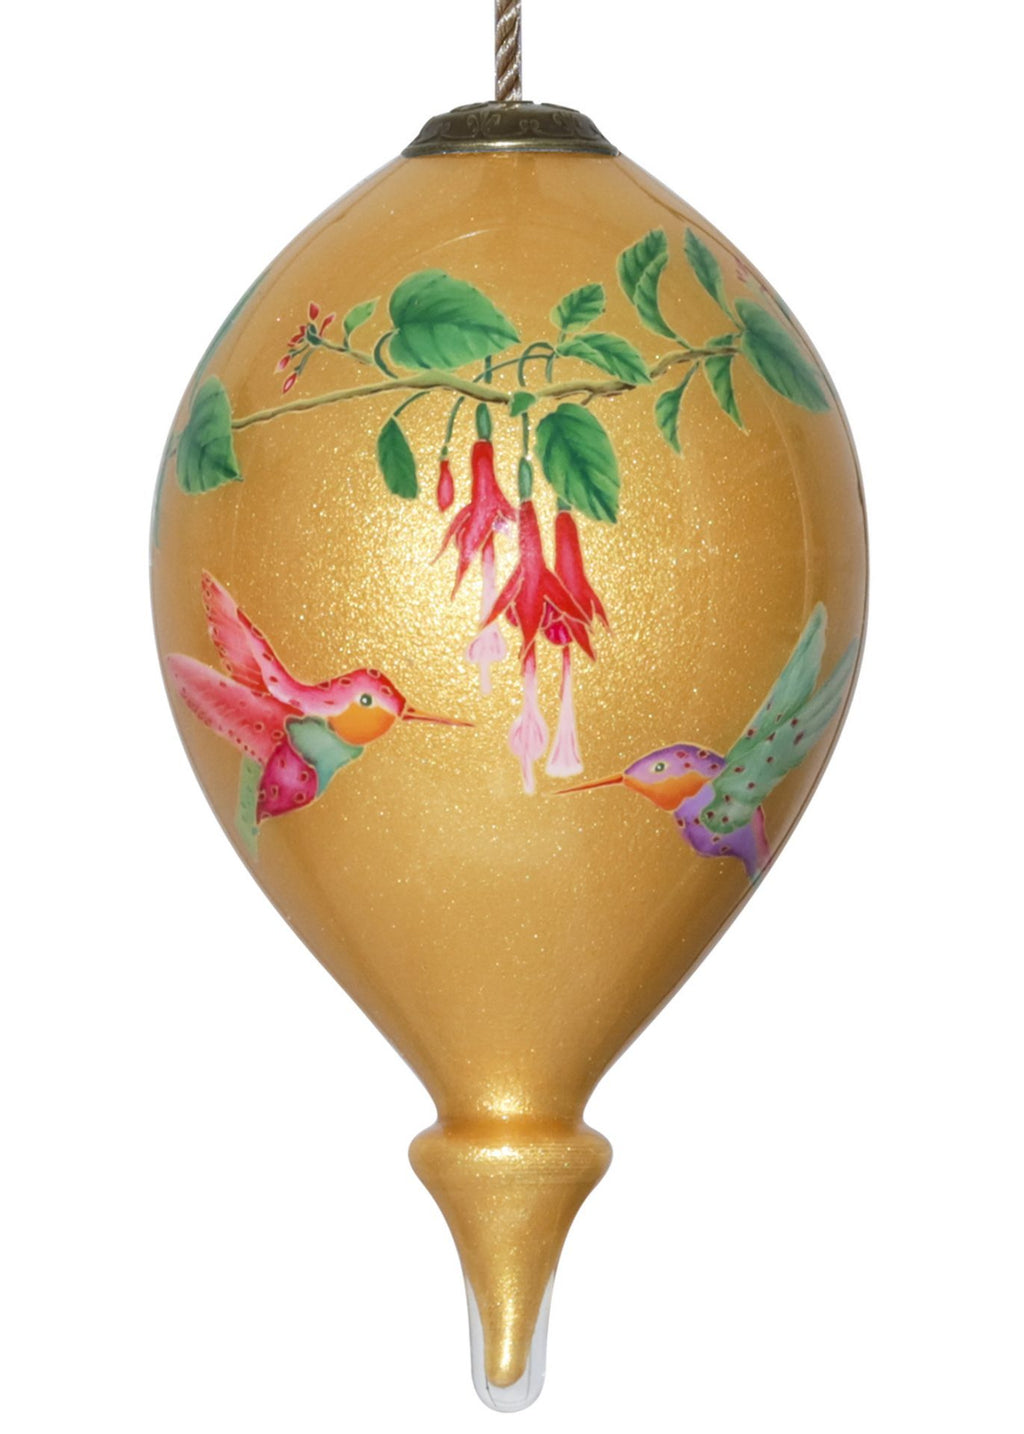 The Parvaneh Hummingbirds and Flowers Ornament by Inner Beauty is a wonderful warm contrast to what may be going on outside your window. 